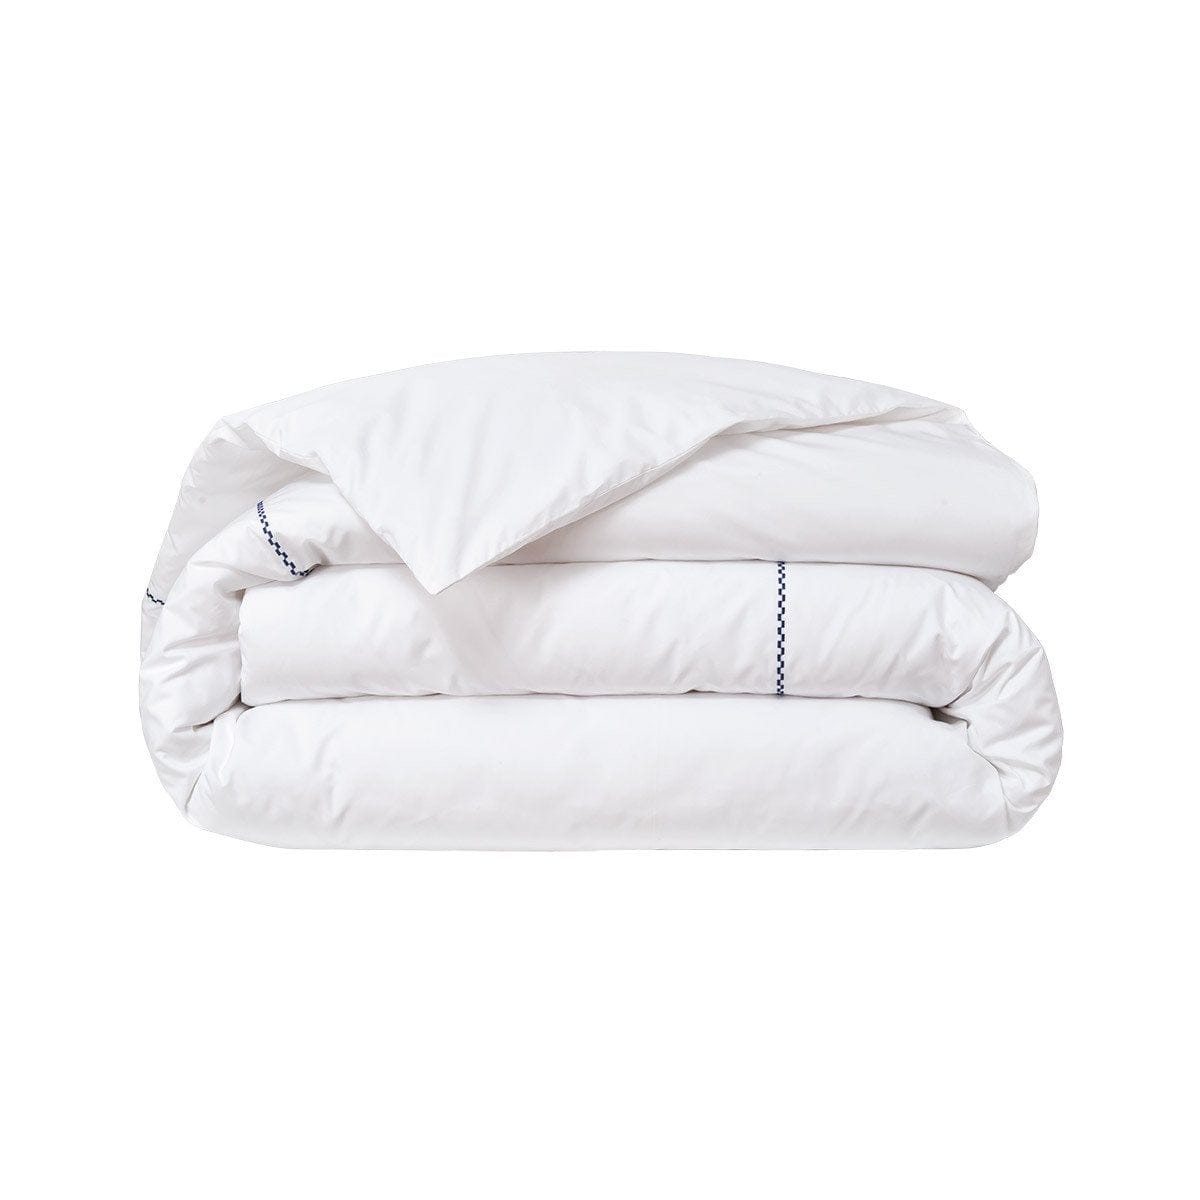 Duvet Cover Alienor Duvet Cover by Yves Delorme Twin 68 x 86 in / Outremer Yves Delorme